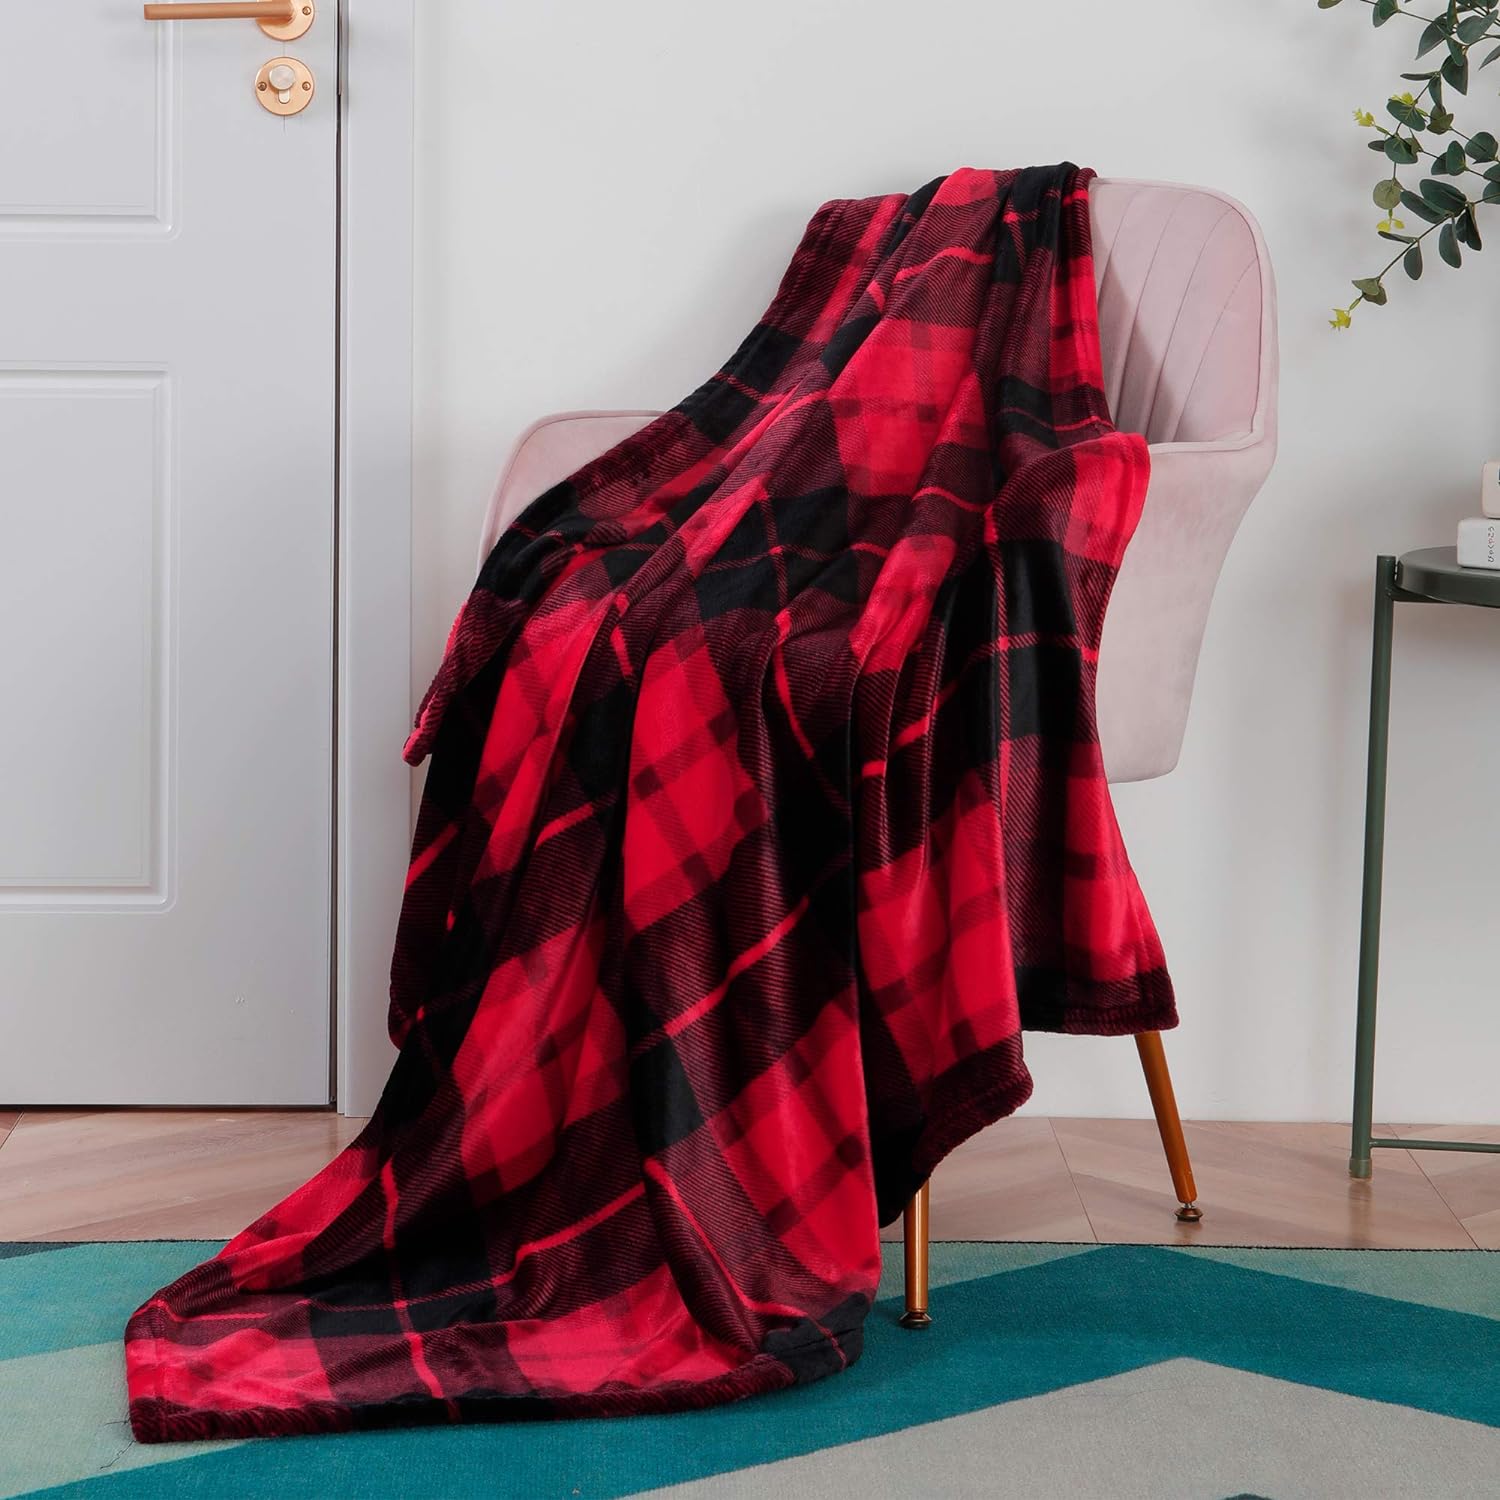 thinkstar Flannel Fleece Throw Blanket 60 × 80 Inches, All Season Plaid Red Blanket For Bed, Couch, Car